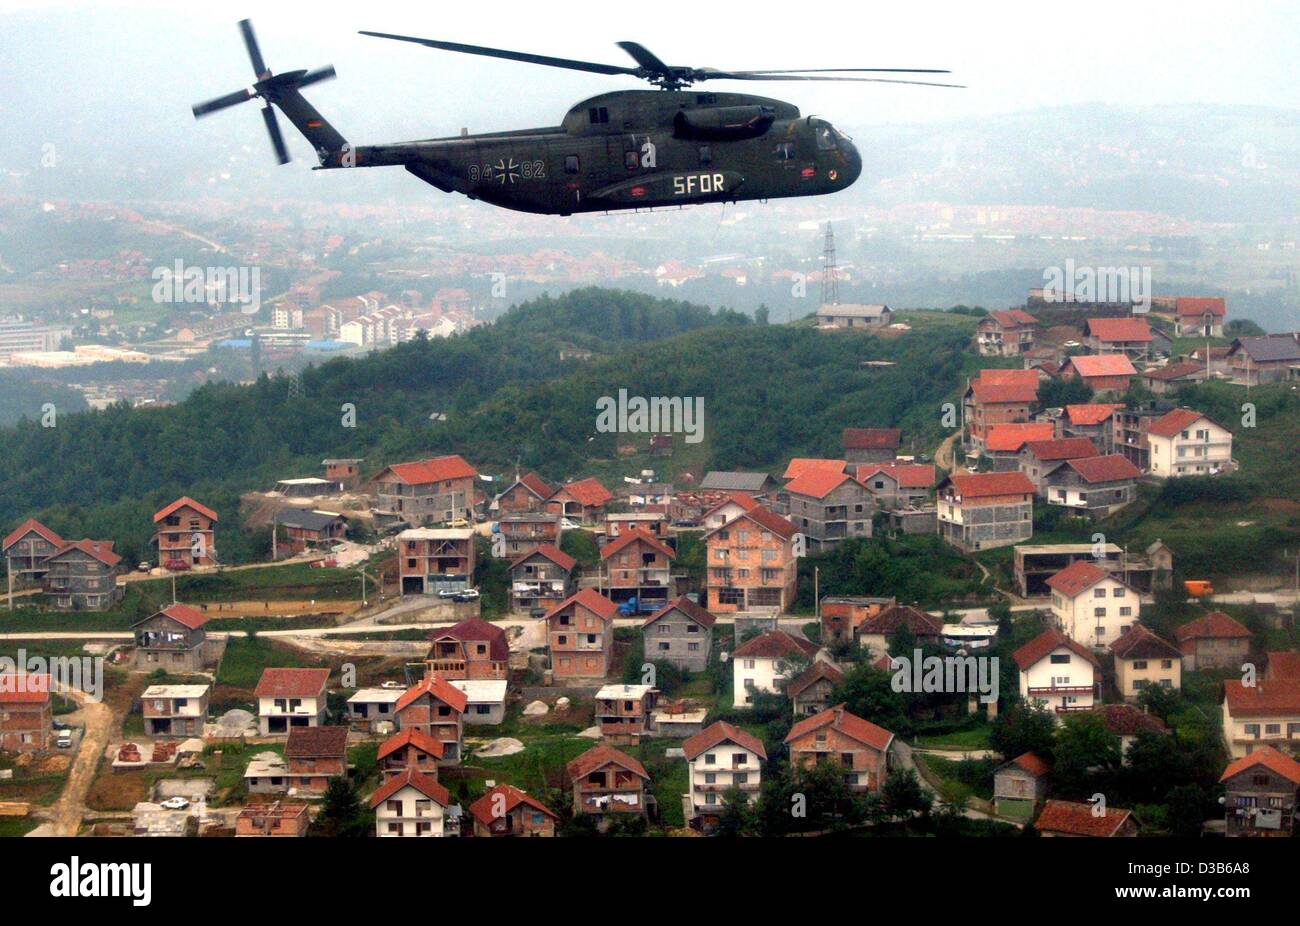 (dpa) - A CH-53 helicopter of the German army serving with the NATO-led Stabilisation Force (SFOR) flies over a suburb of Sarajevo, Bosnia and Hercegovina, 30 August 2002. Currently about 4600 German soldiers serve in Kosovo, 1500 in Bosnia and Hercegovina and 225 in Macedonia. Stock Photo